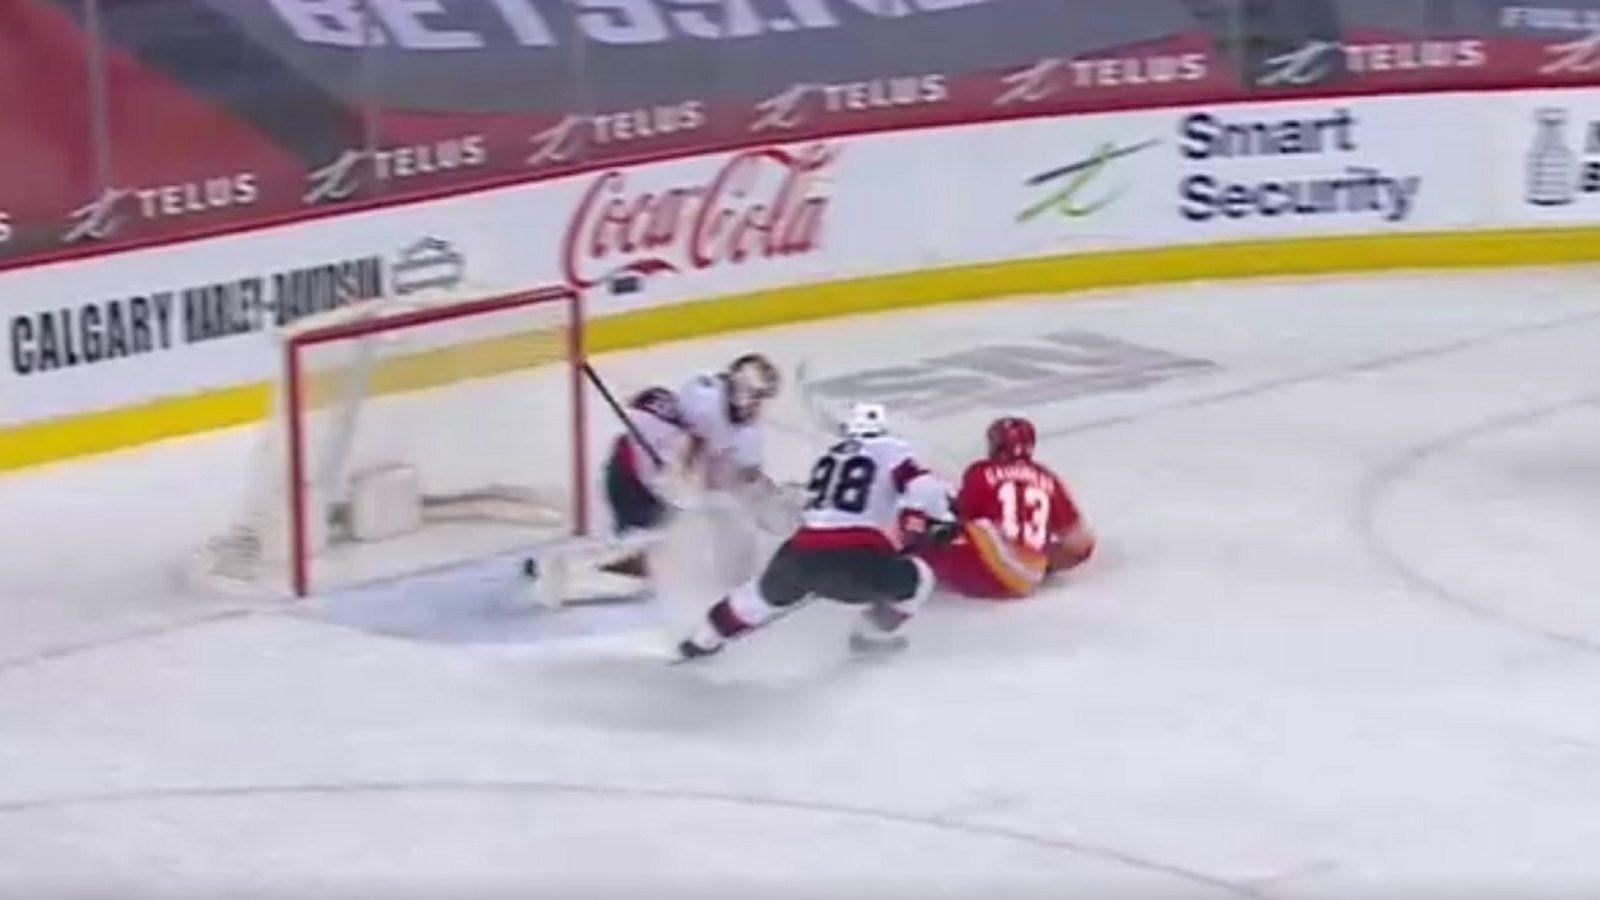 Johnny Gaudreau scores from his backside on the breakway.